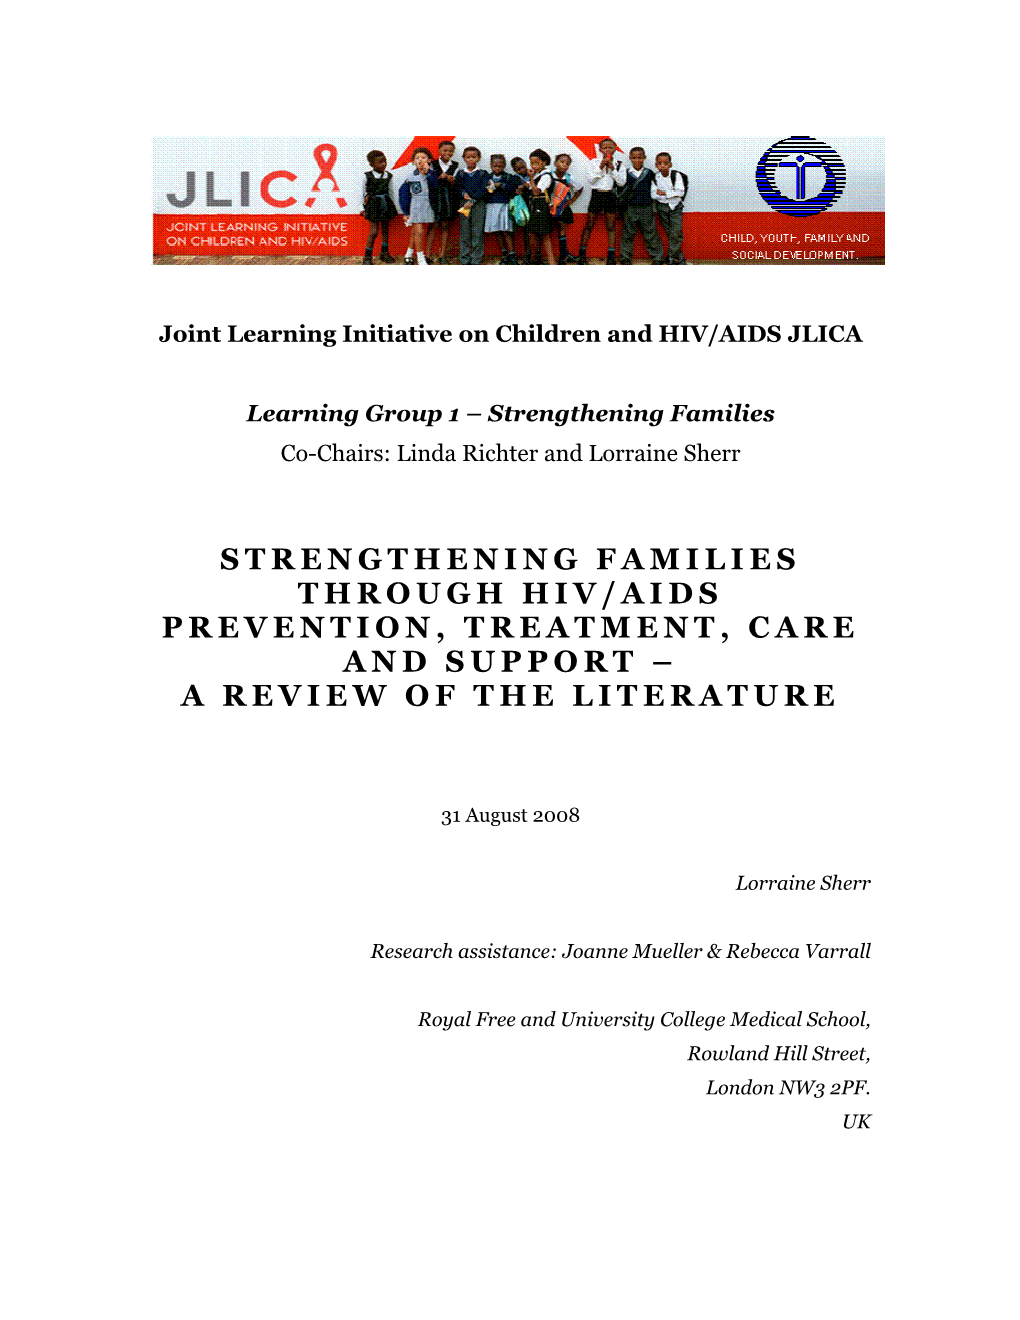 Strengthening Families Through Hiv/Aids Prevention, Treatment, Care and Support – a Review of the Literature